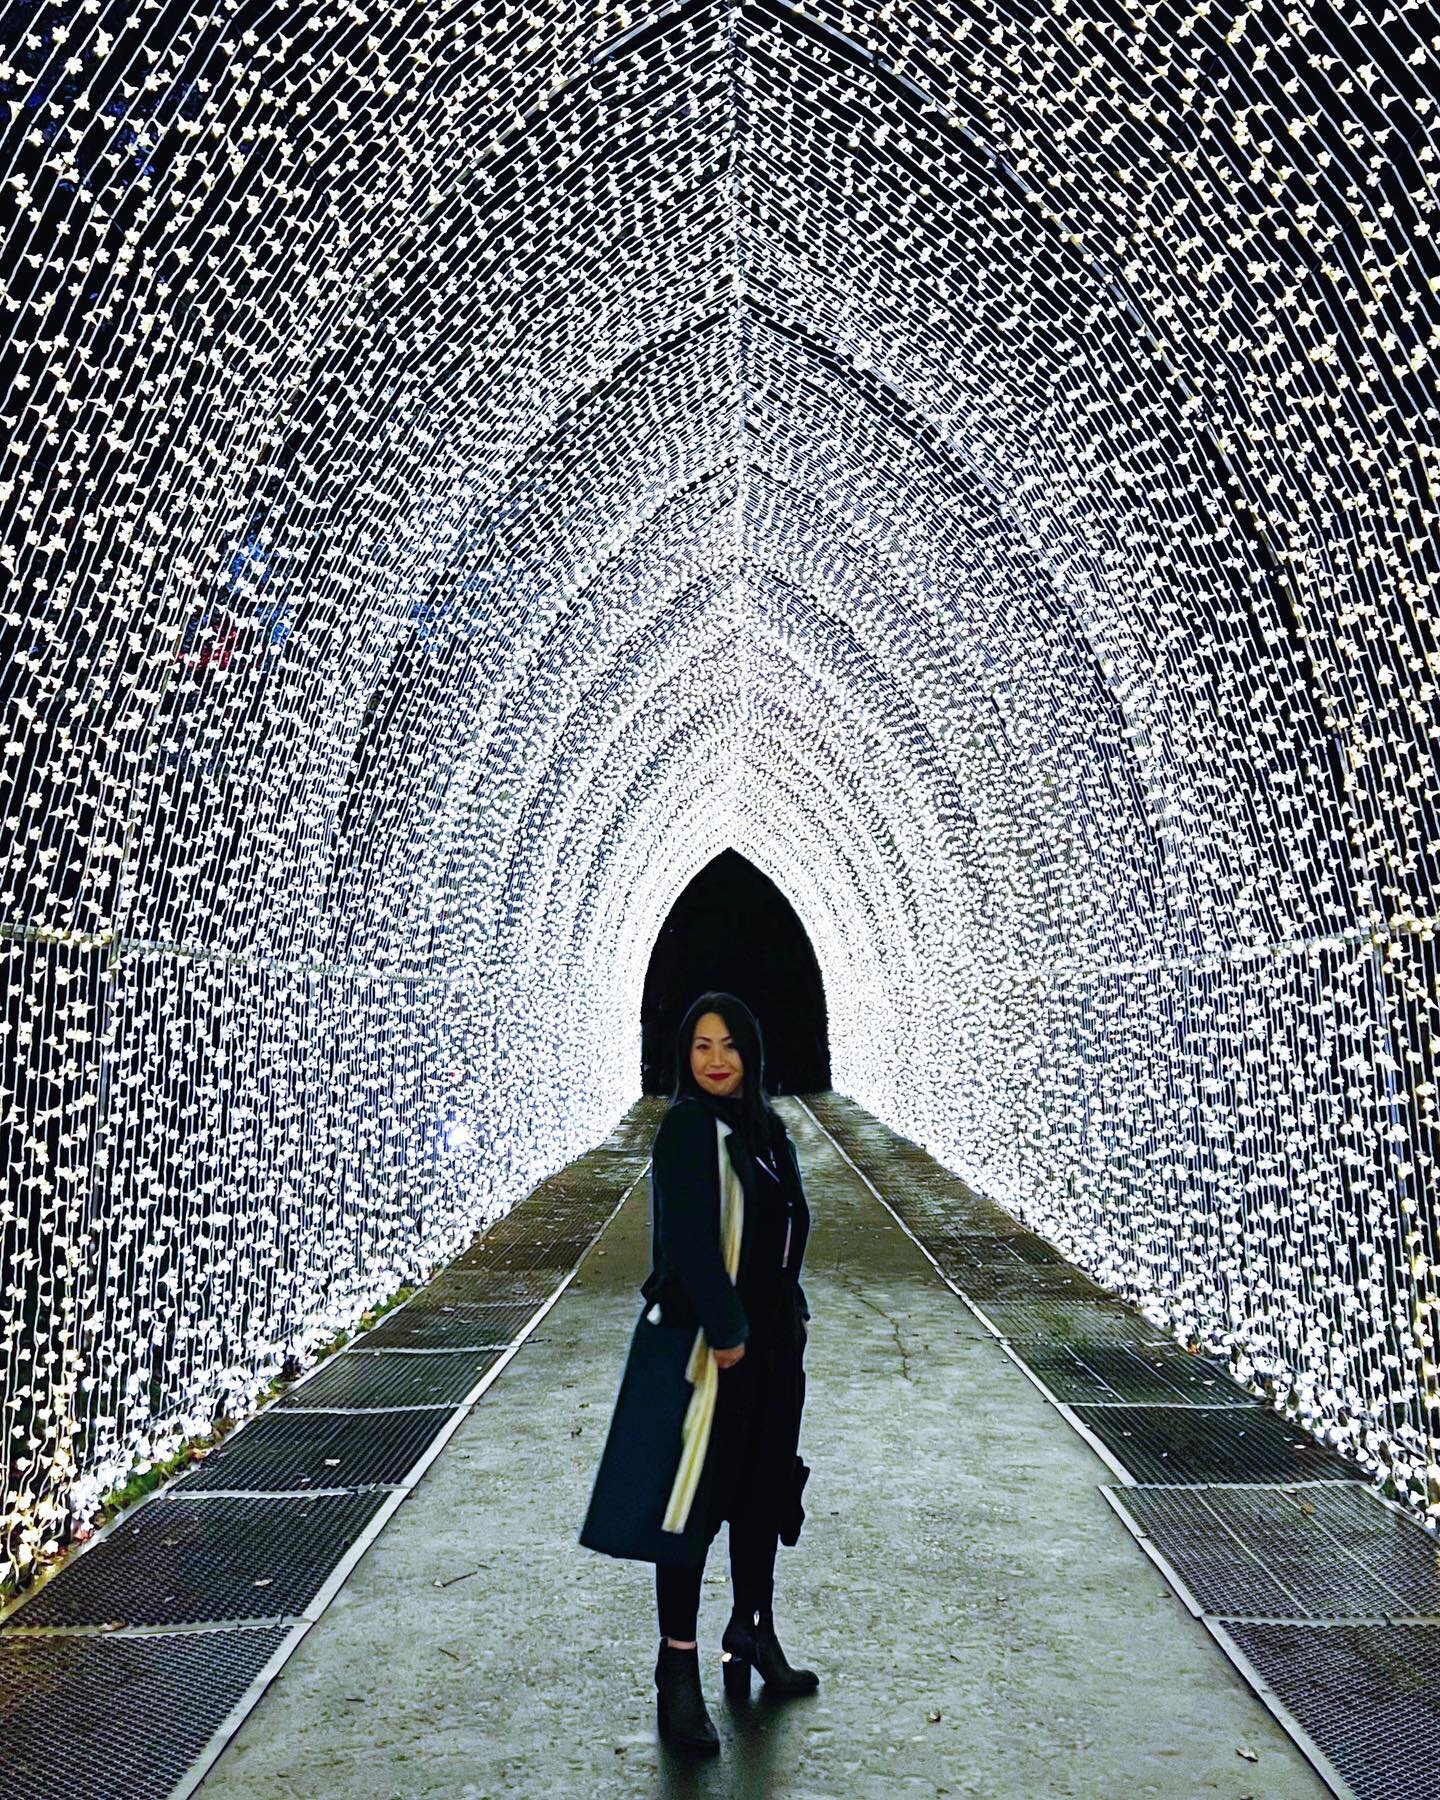 Isn&rsquo;t there supposed to be light at the end of this? 
📍Cathedral of Light, @kewgardens, UK
📸 @sarageverett
#kewgardens #surrey #london #lightinstallation #publicart #london🇬🇧